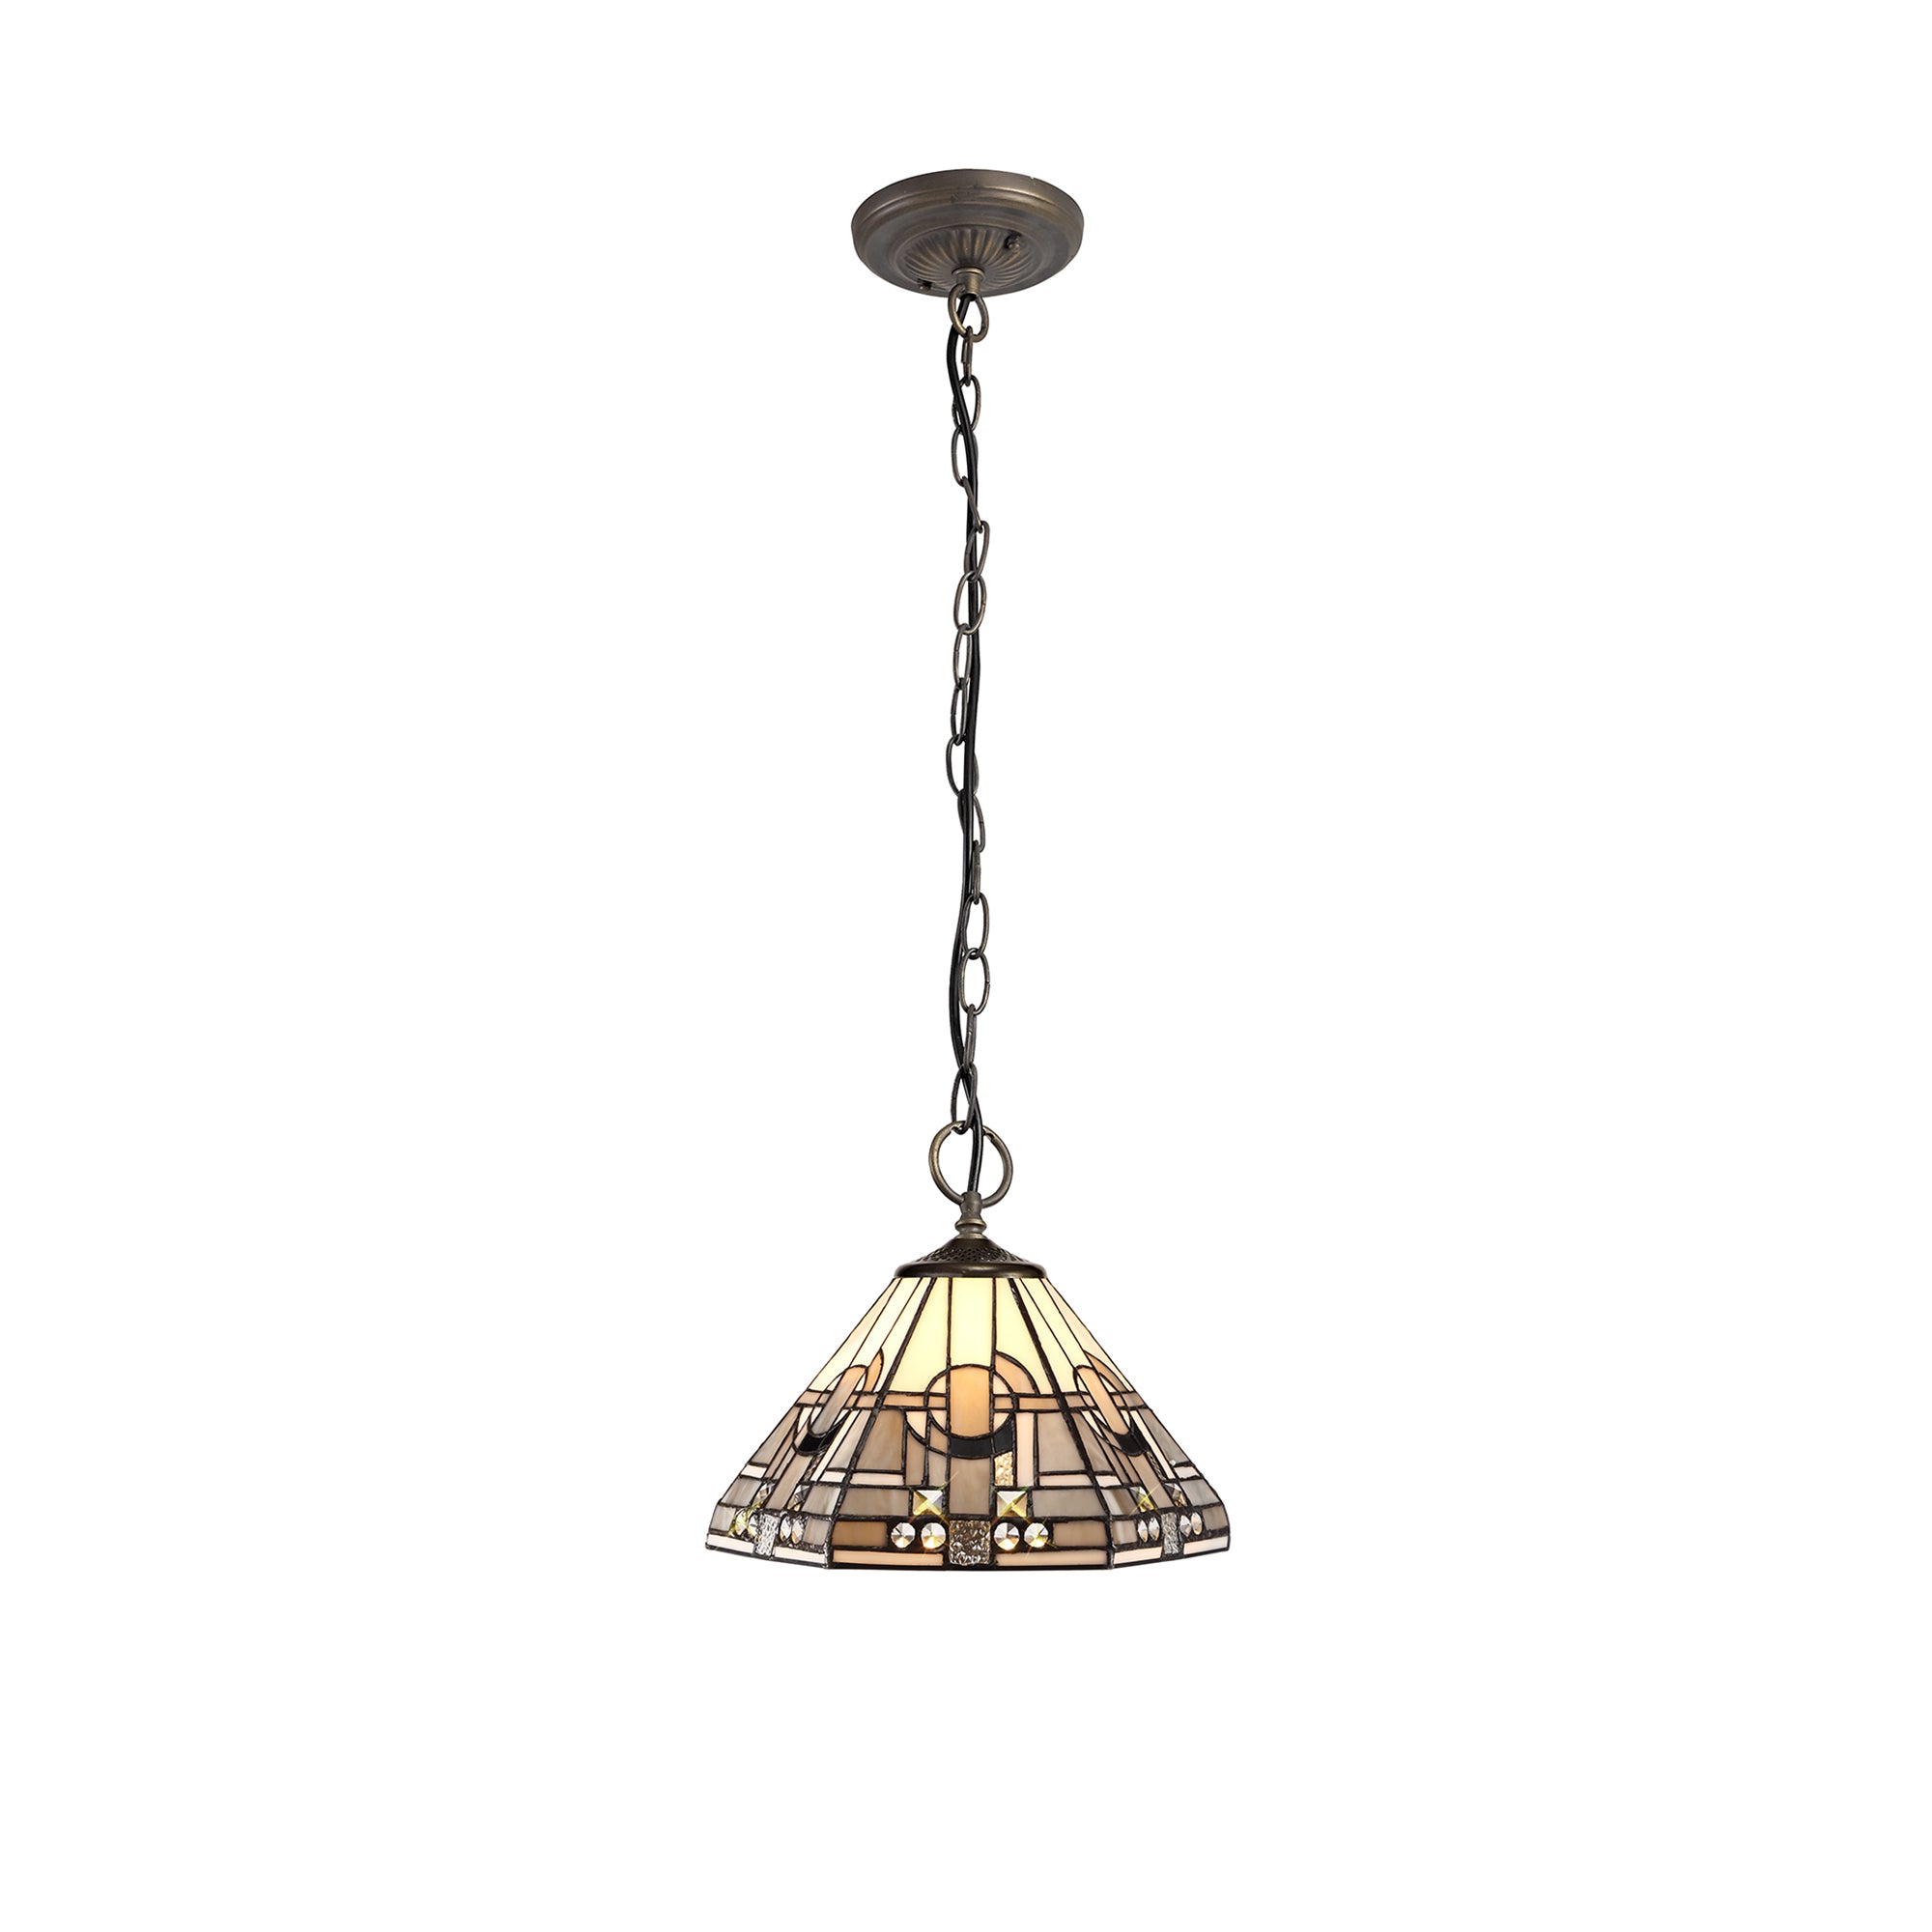 Atek 3 Light Downlighter Pendant E27 With 30cm Tiffany Shade, White/Grey/Black/Clear Crystal/Aged Antique Brass